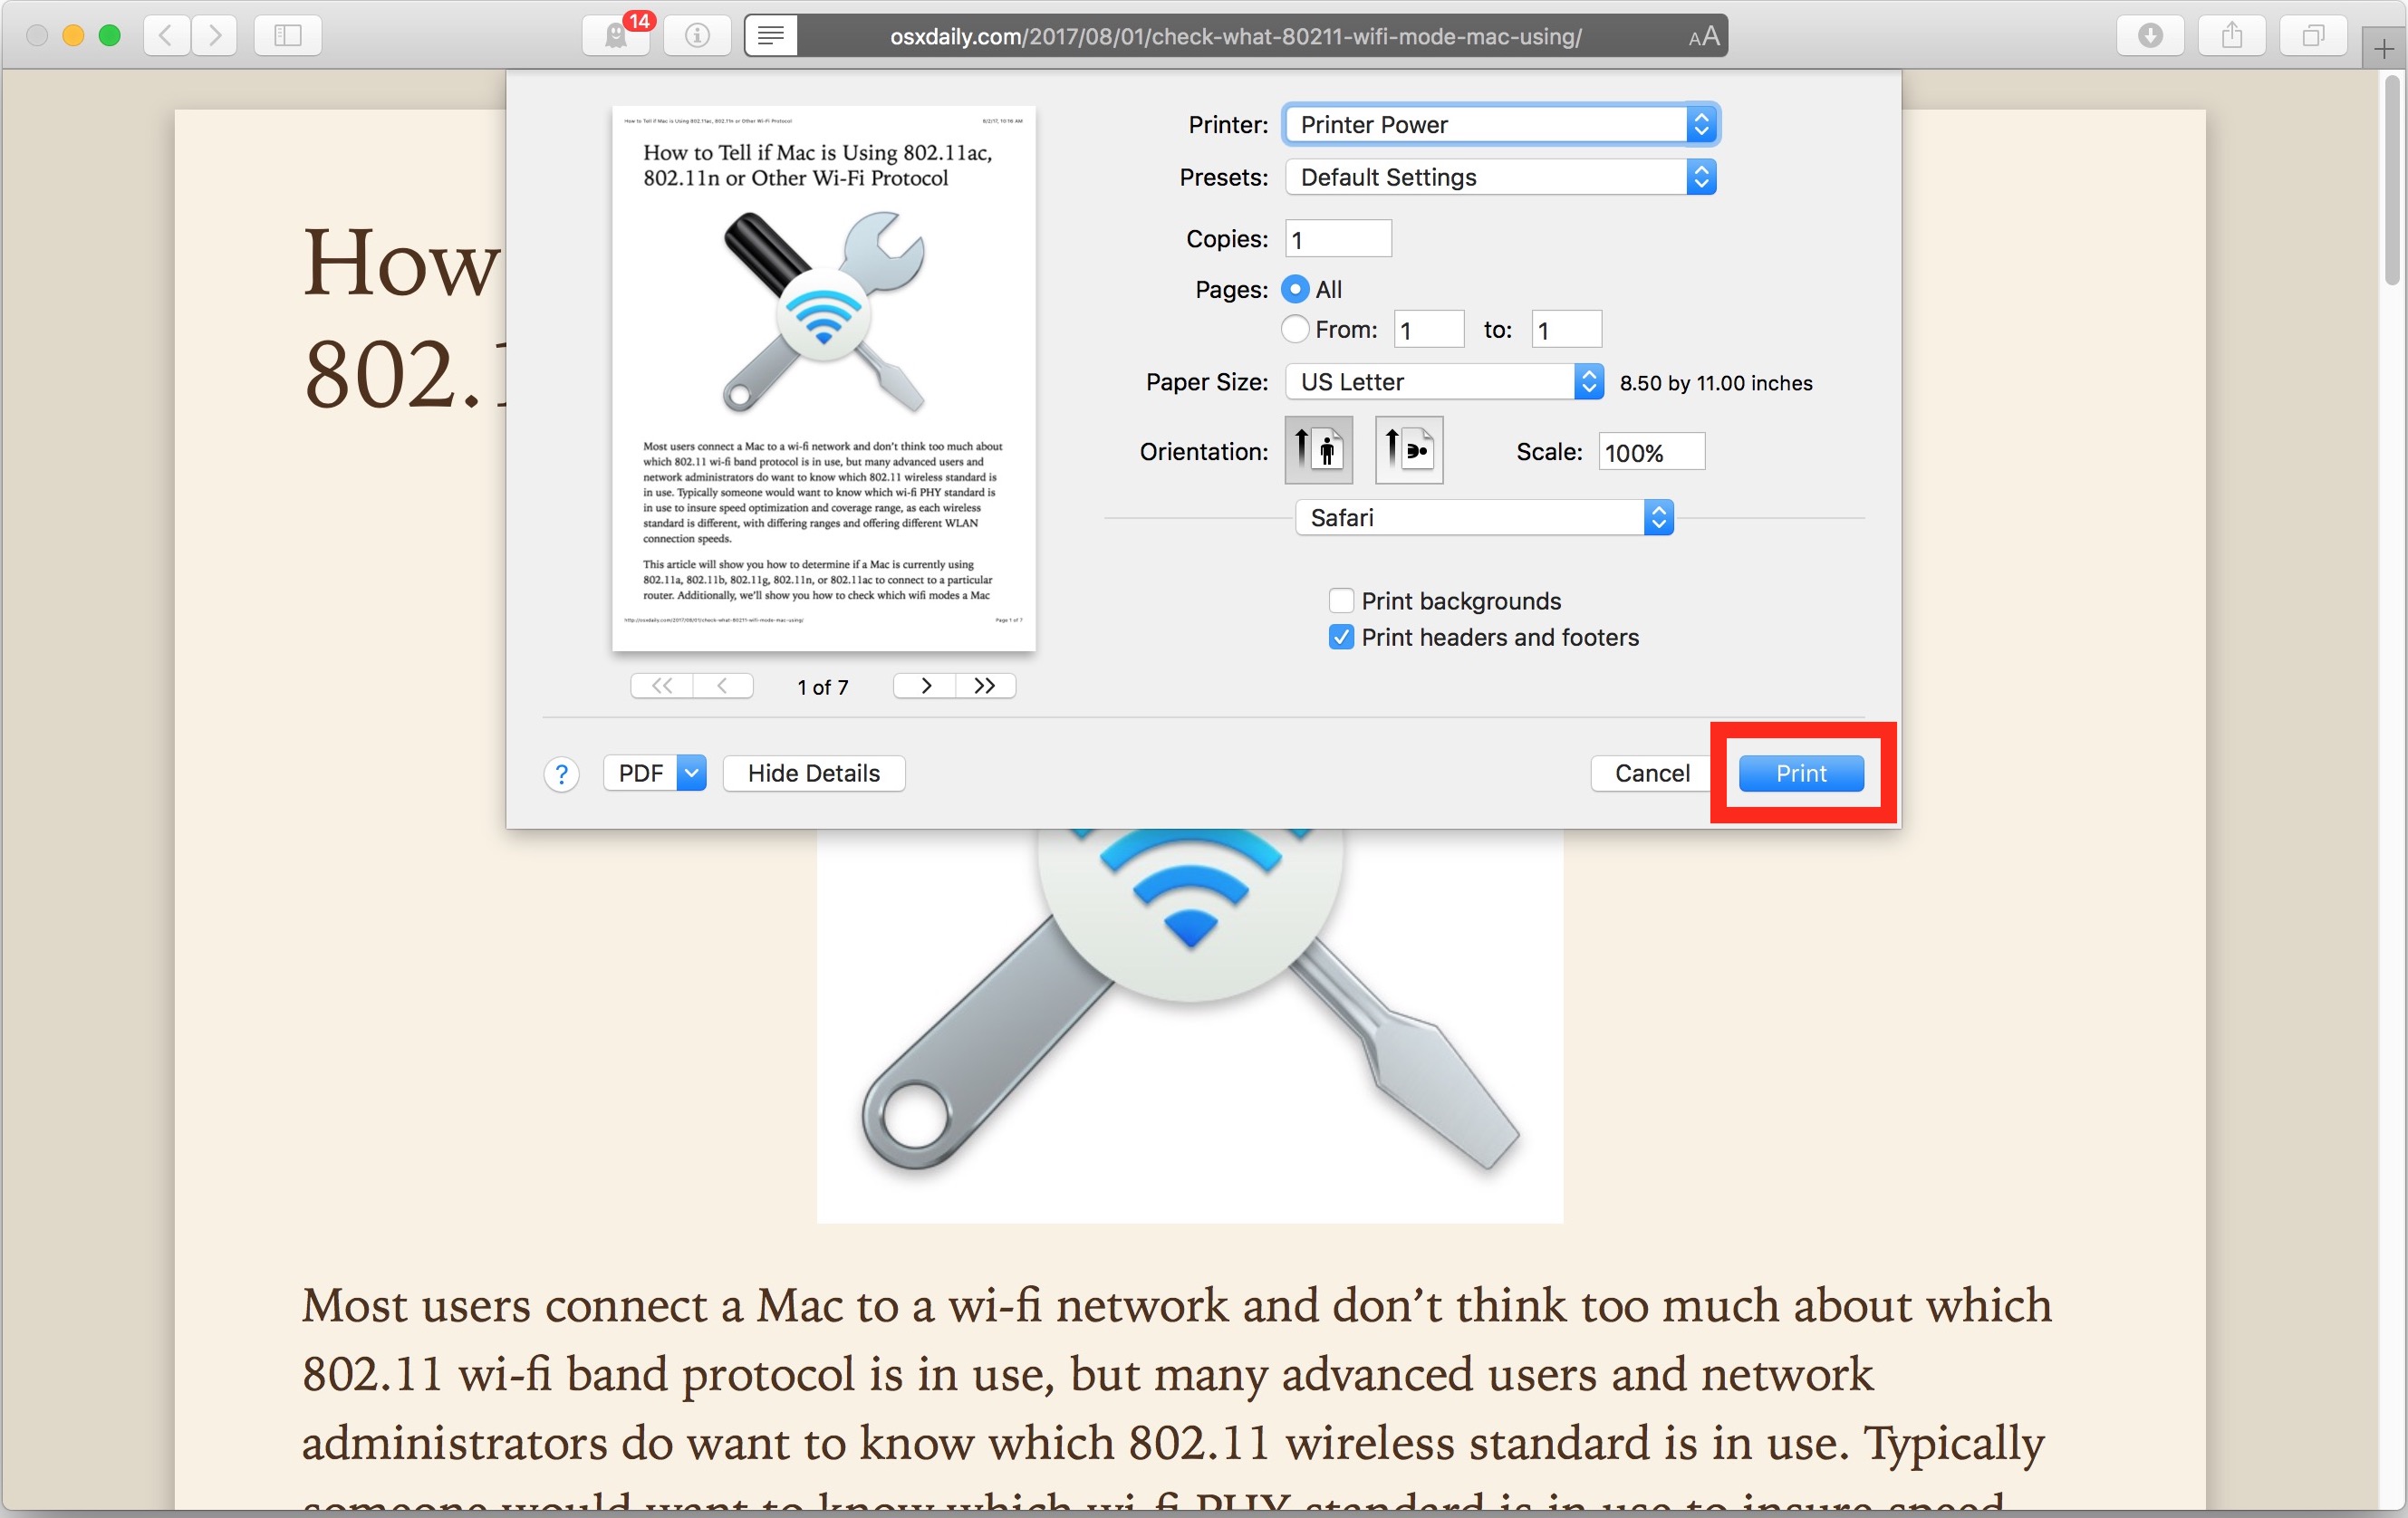 Print an article or webpage without ads in simplified form from Mac